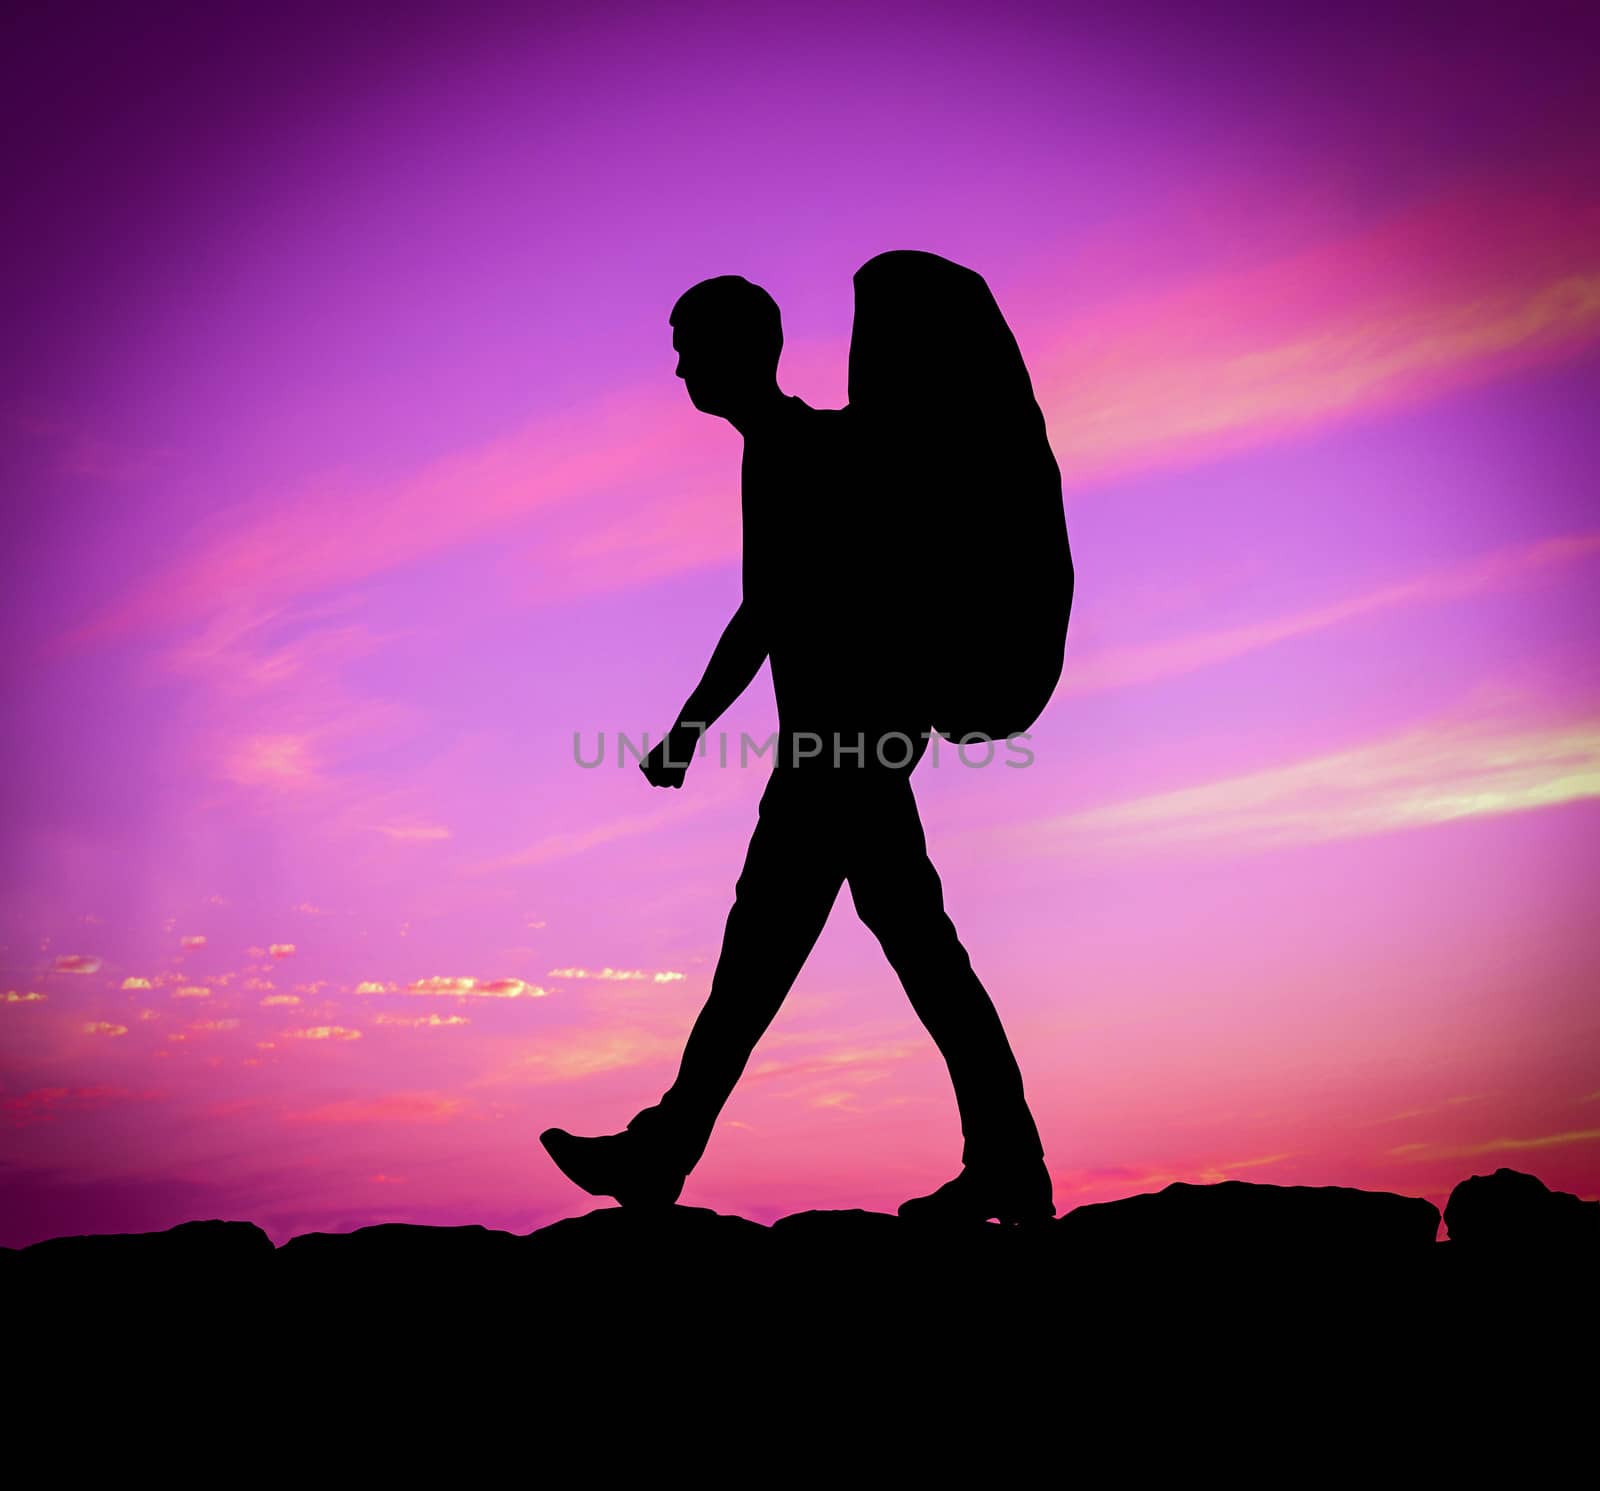 Silhouette Of A Hiker With Backpack Against A Purple Sunset